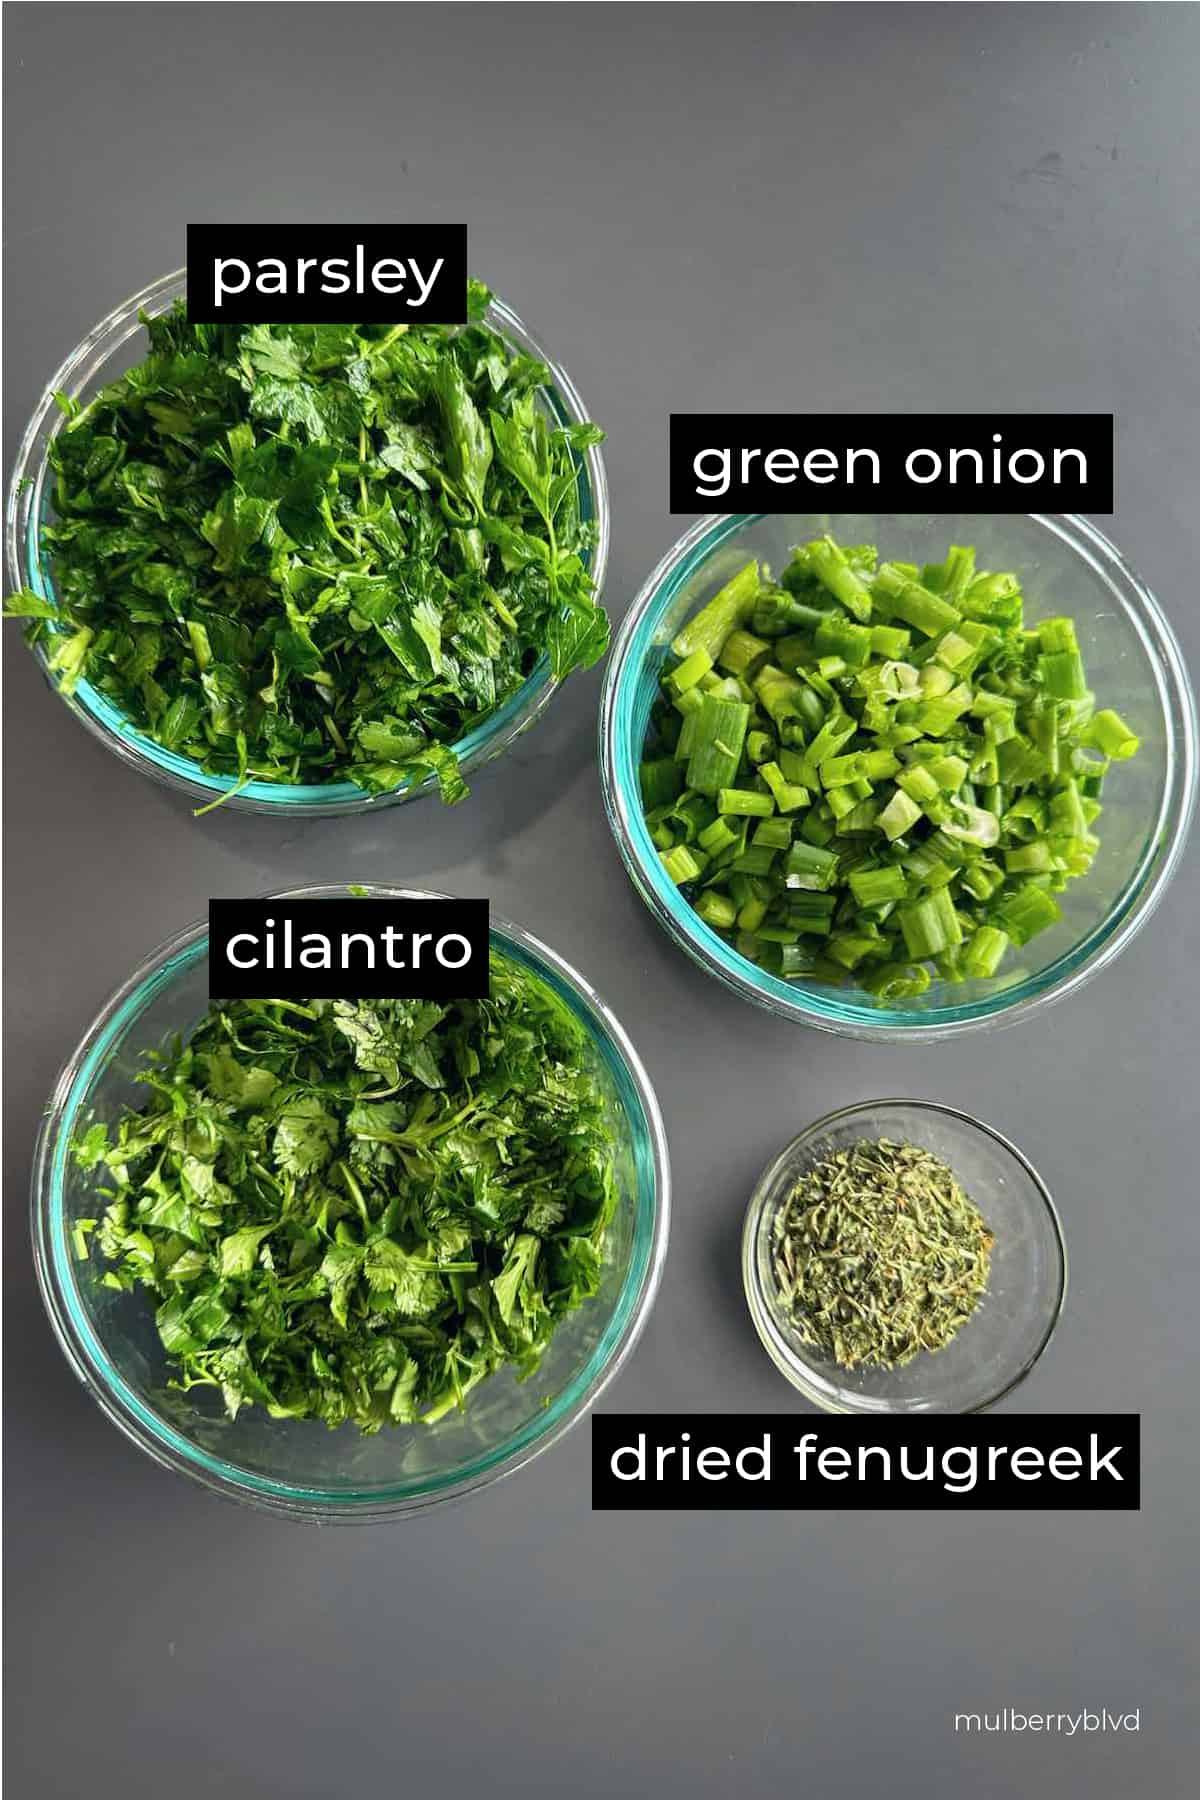 Picture of ingredients. Parsley, cilantro, green onion and dried fenugreek.